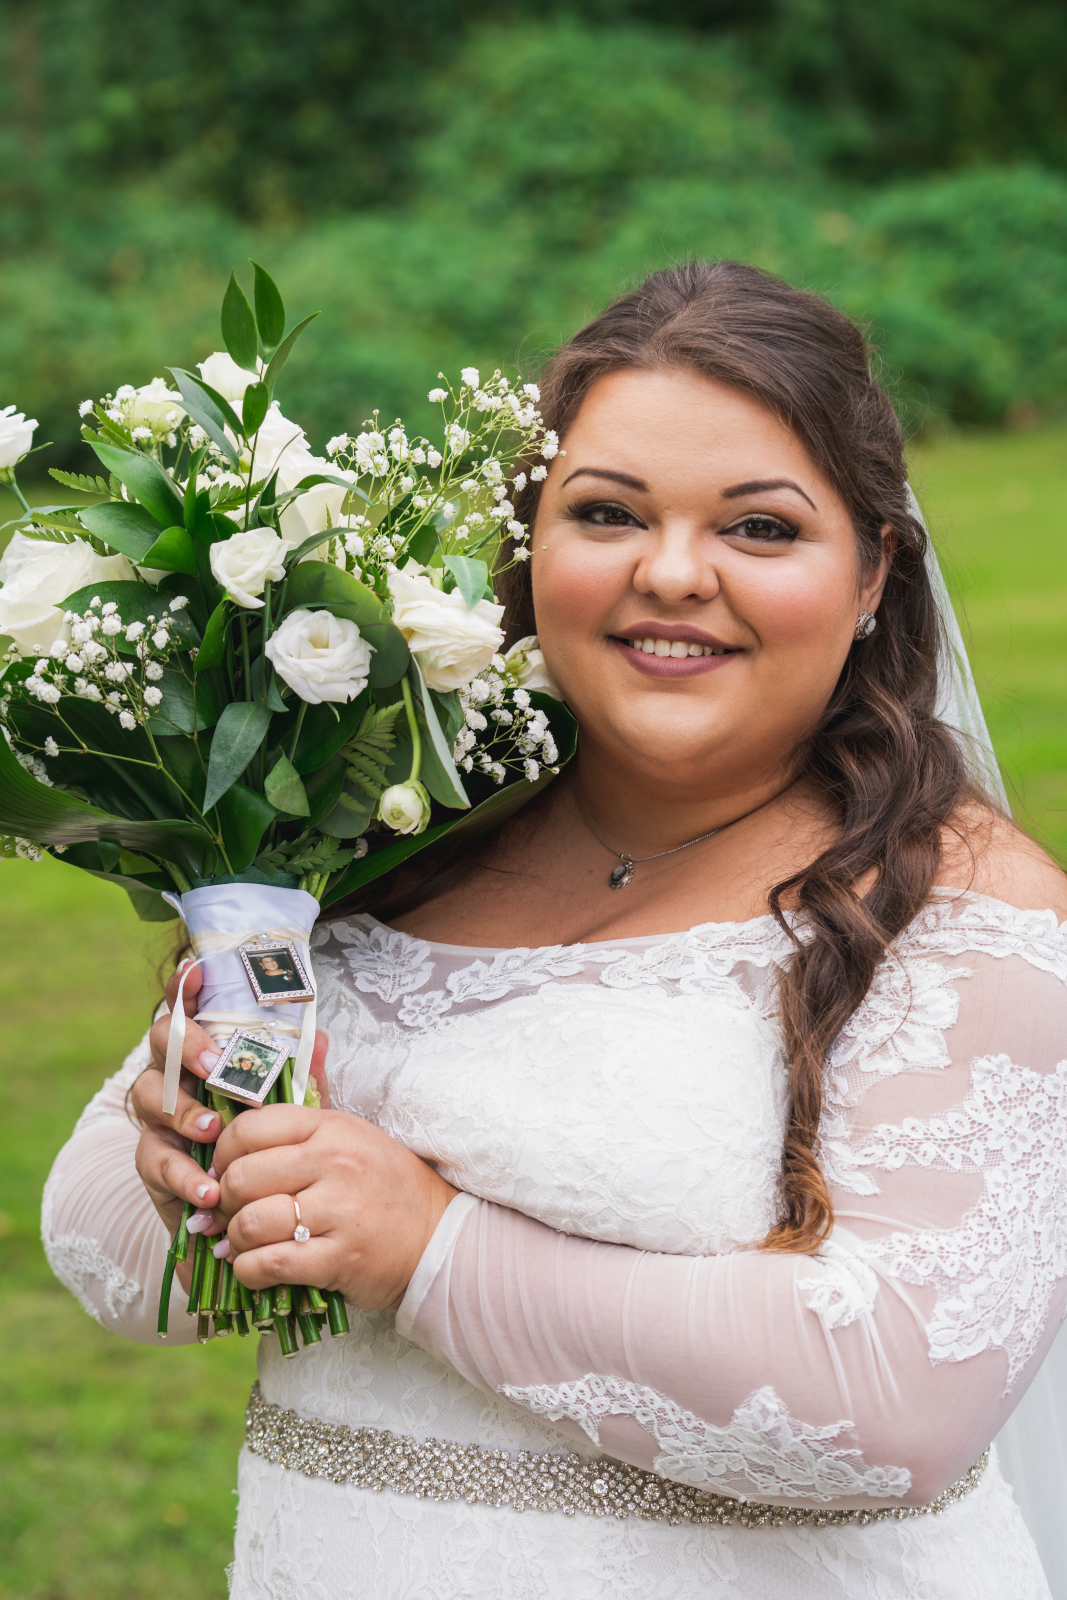 Bride holding bouquet, bridal portrait, smile, green, nature, outdoor September wedding ceremony at Westfall Event Center